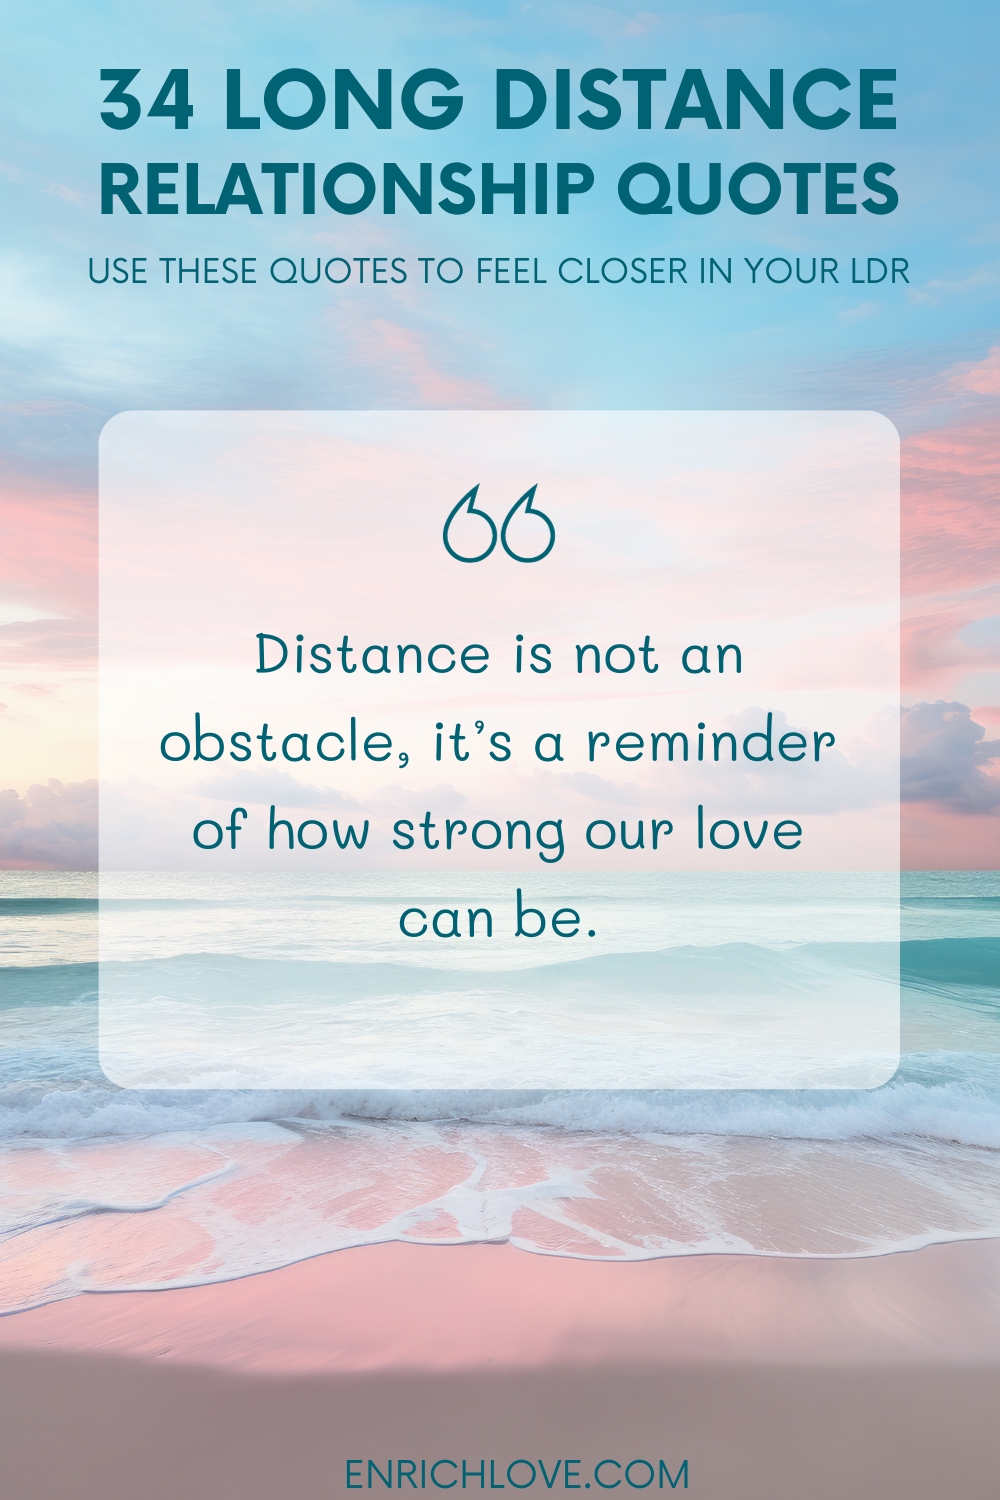 34 Long Distance Relationship Quotes - Distance is not an obstacle, it’s a reminder of how strong our love can be.